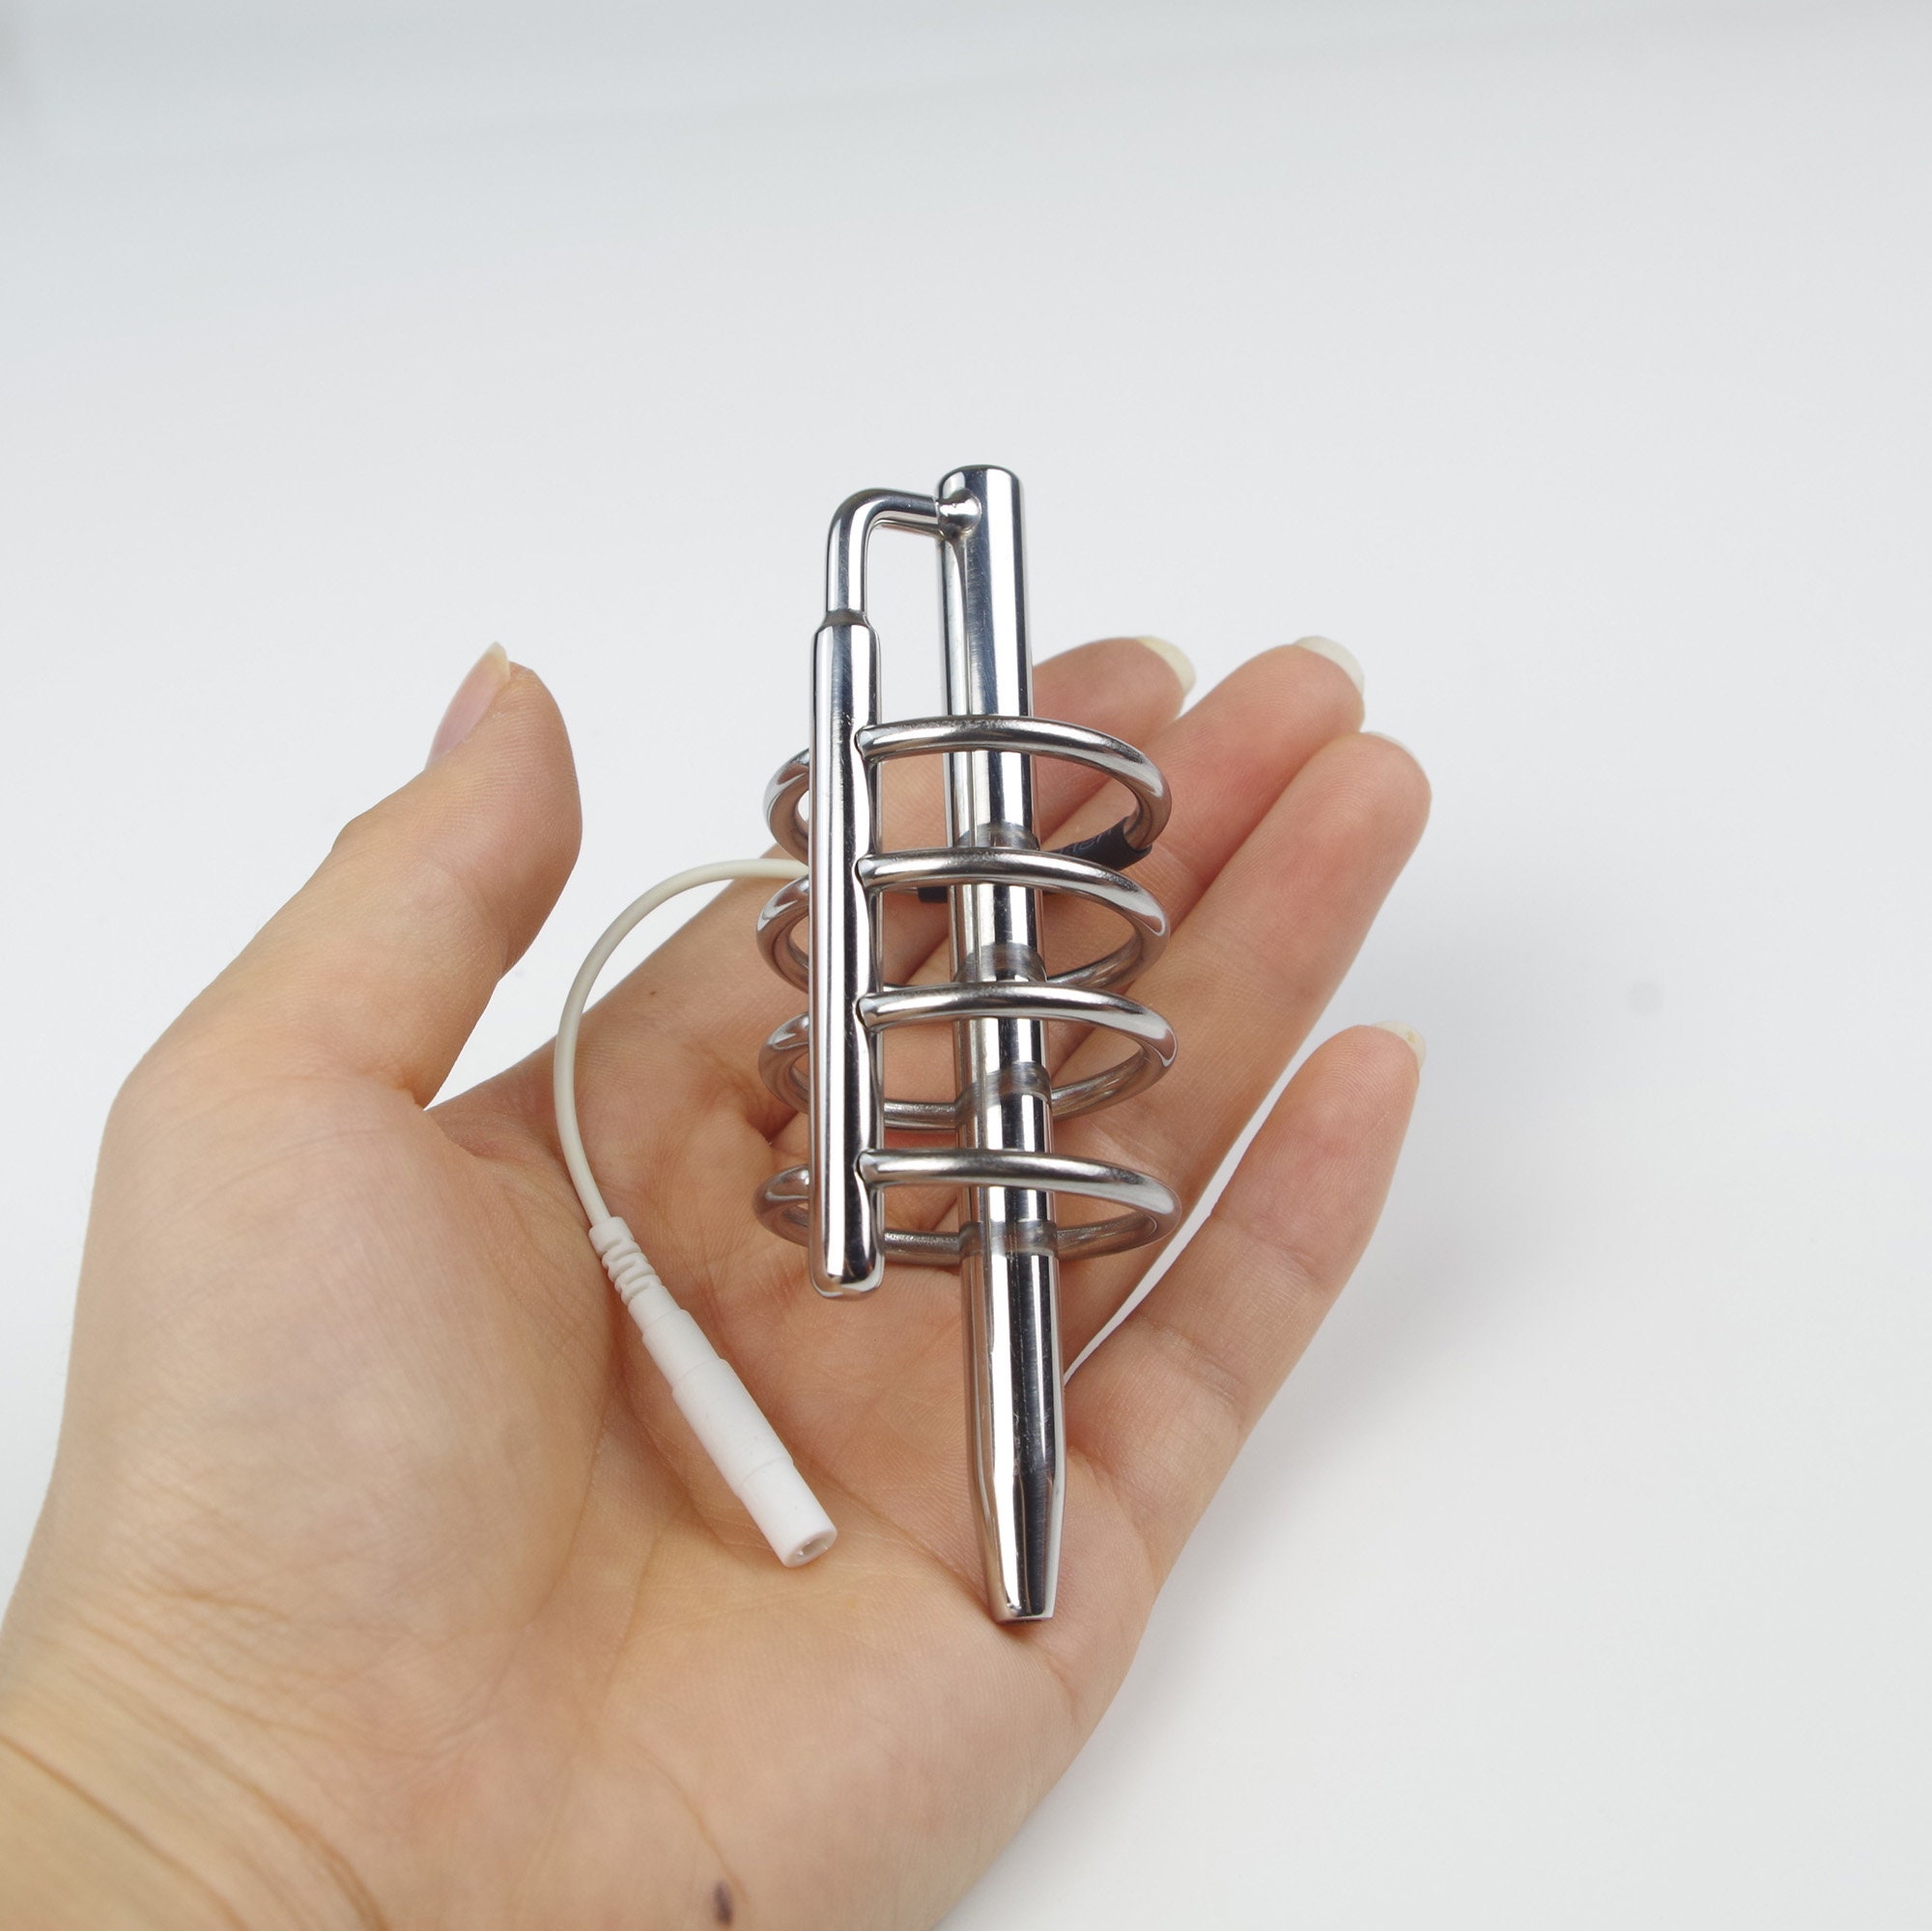 Customizable Male E Stim Urethral Sound With 4 Penis Rings